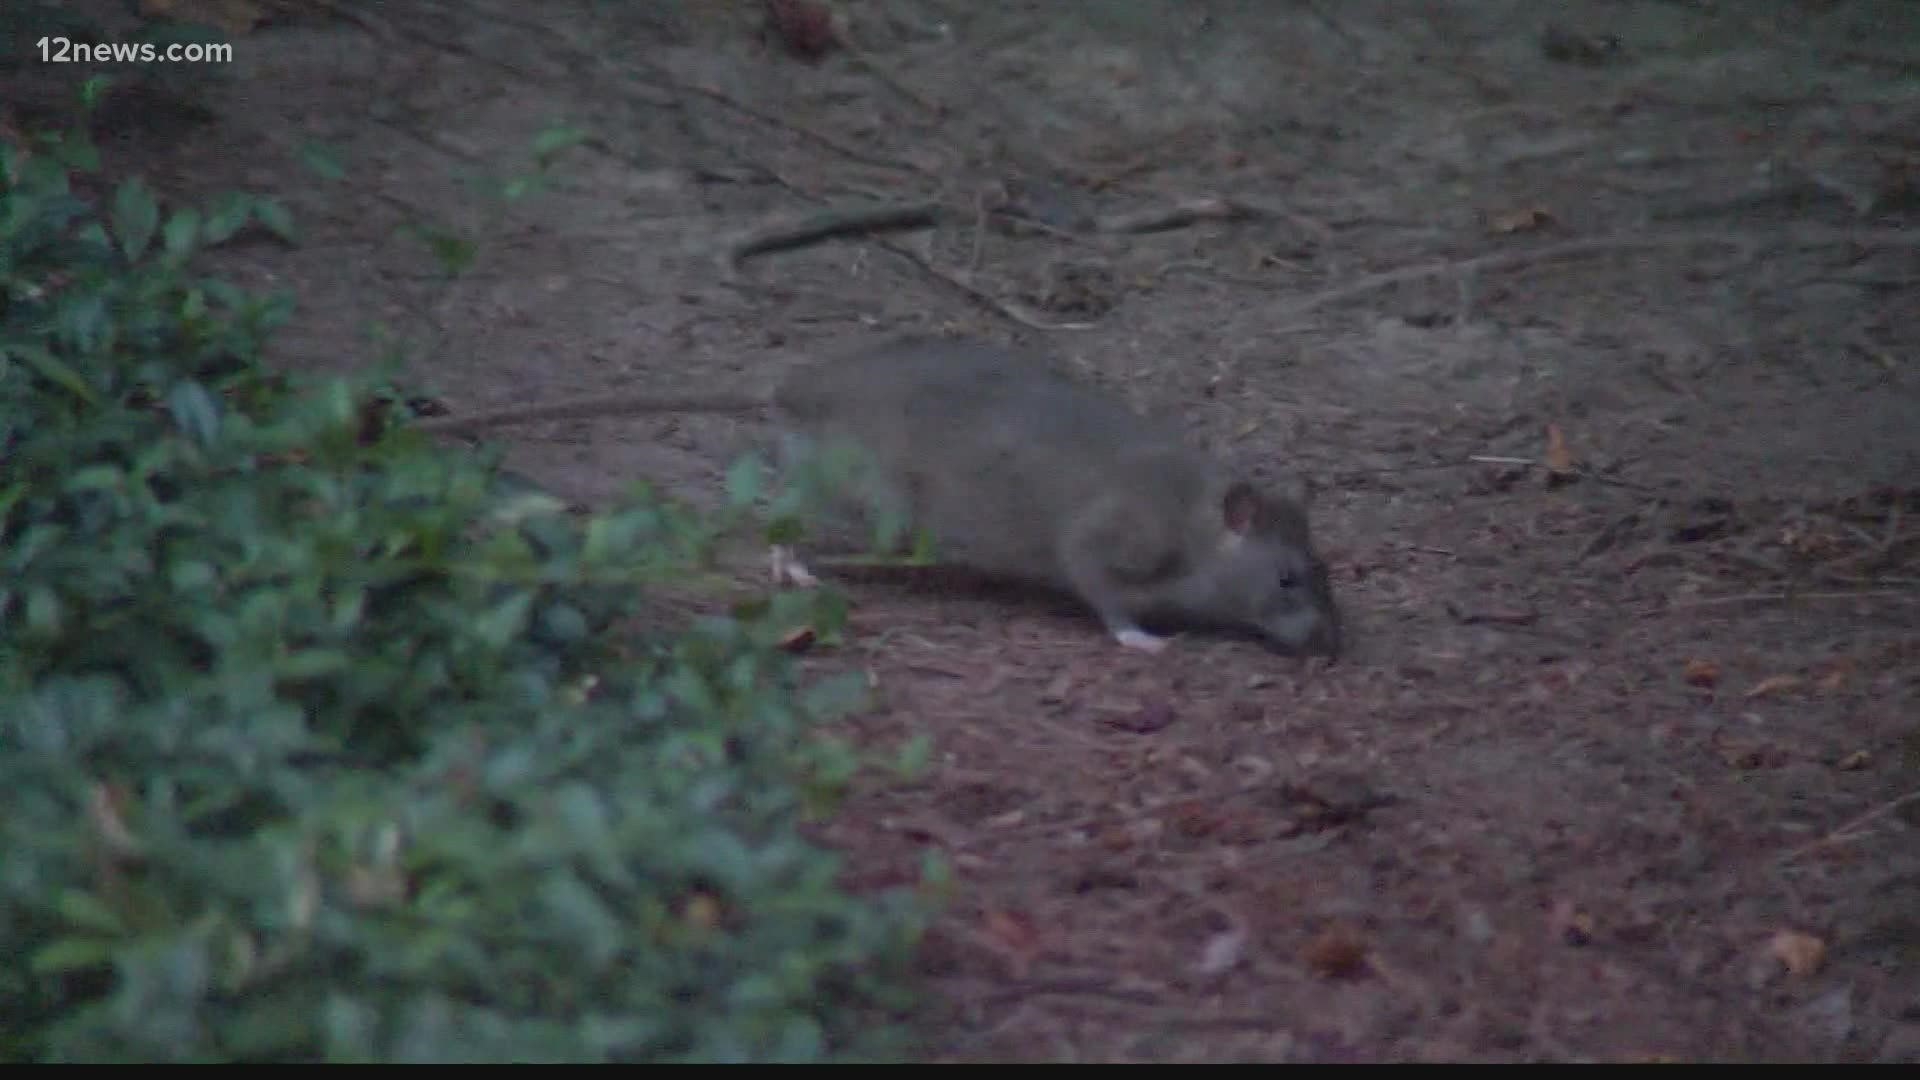 Pest control experts tell 12 News that winter is the time of year they usually get the most rats in the Valley – and the rodents are typically on the move at night.